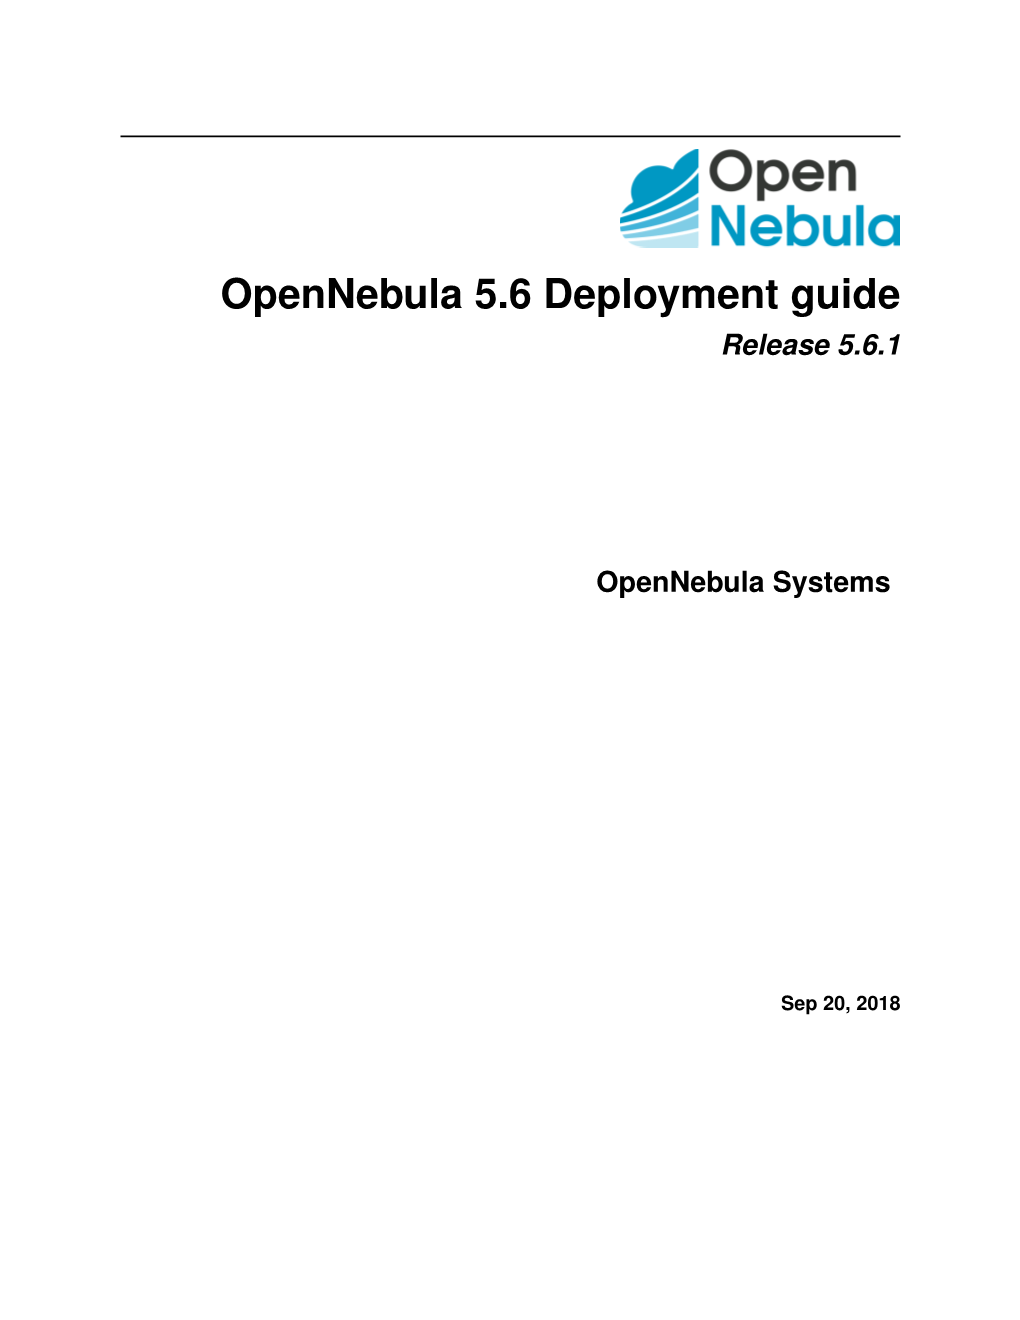 Opennebula 5.6 Deployment Guide Release 5.6.1